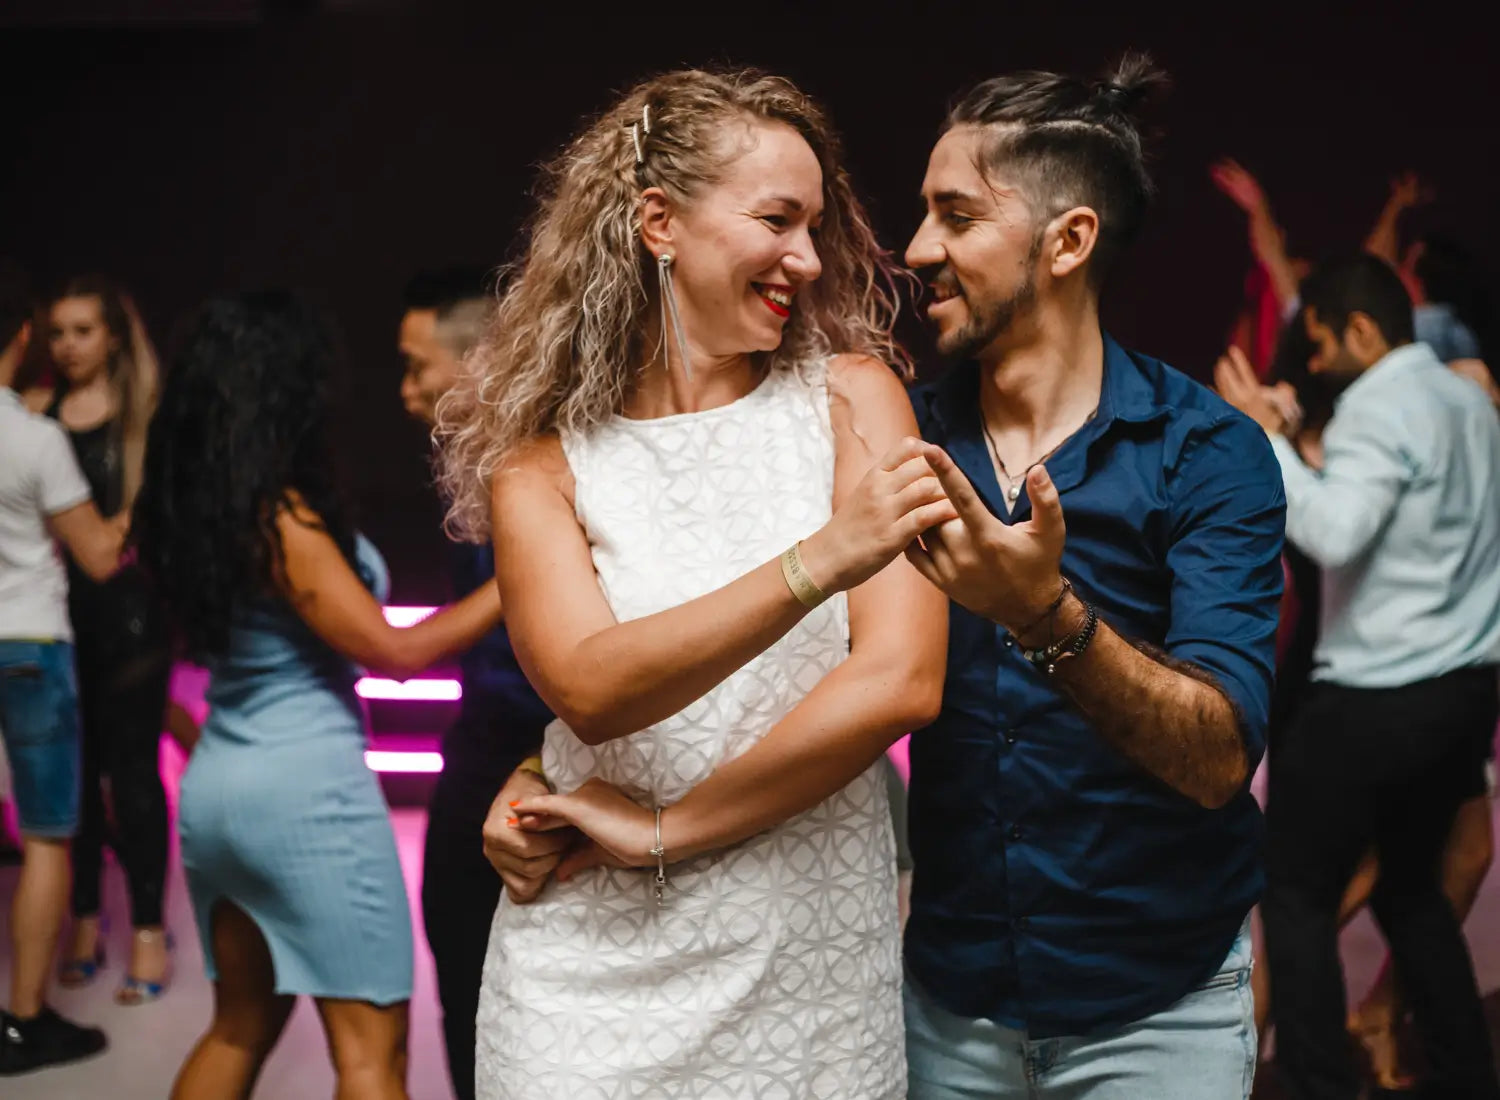 A man and woman smiling and dancing closely together on a lively dance floor with other dancers in the background.